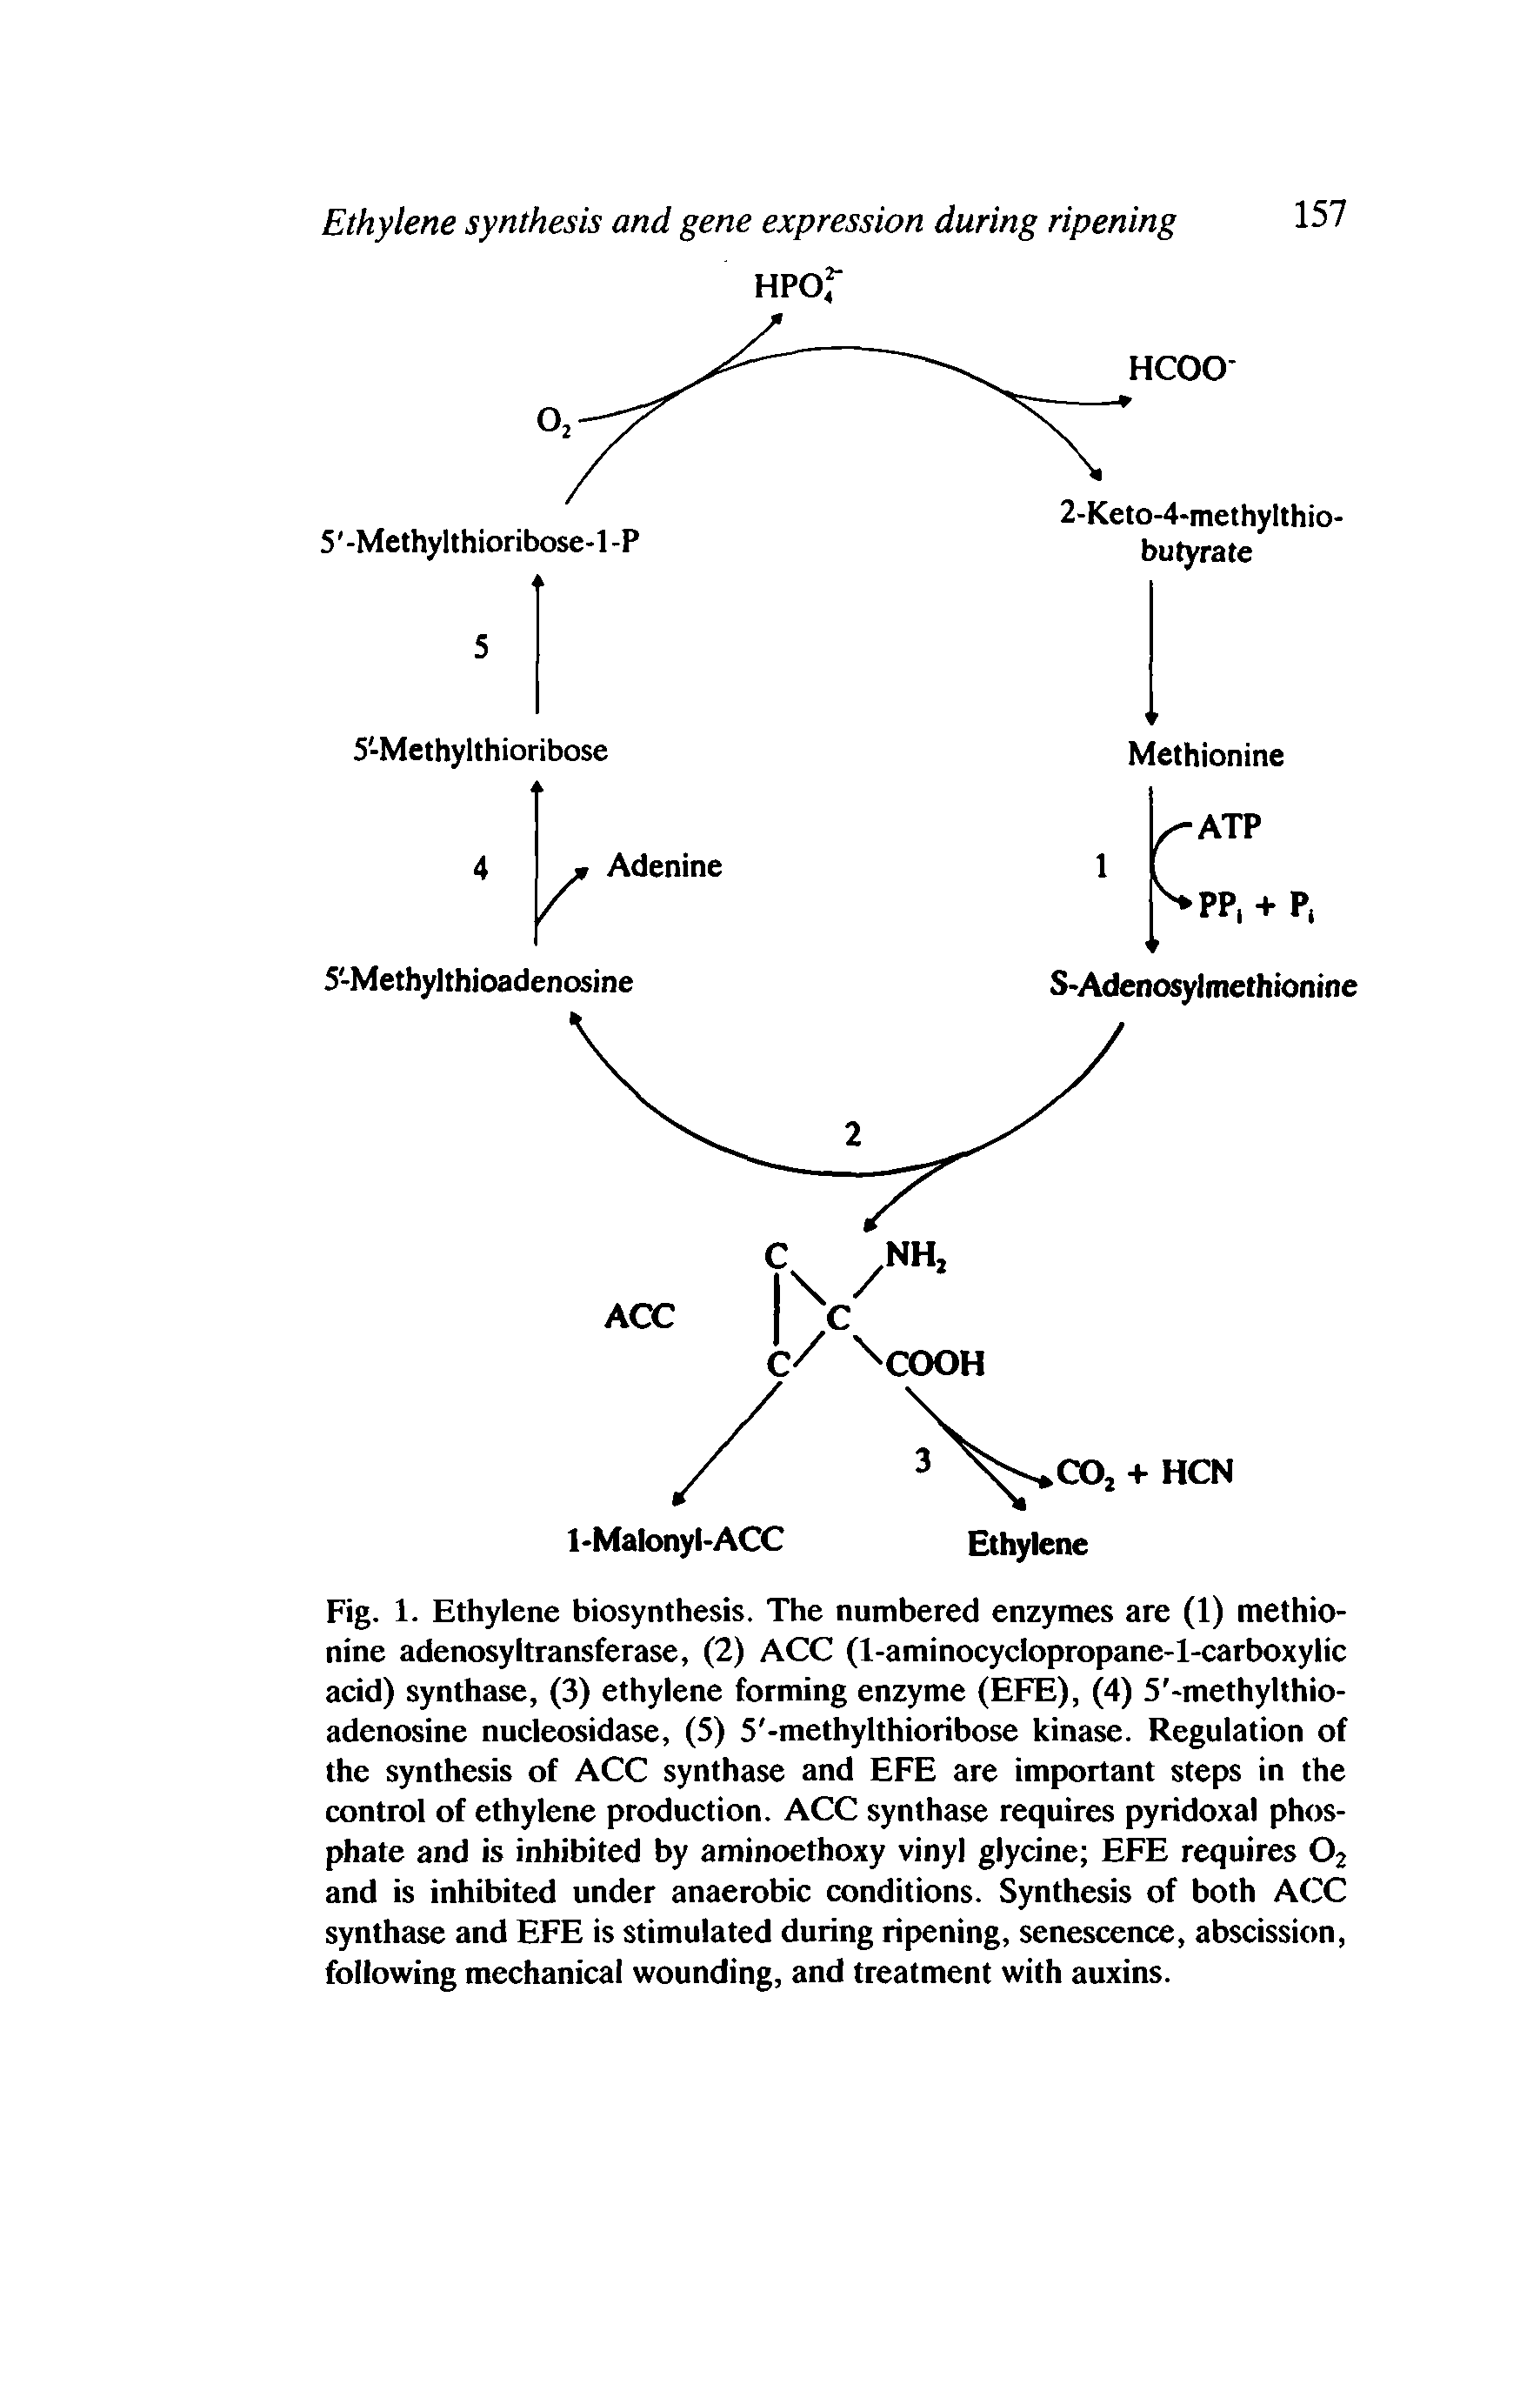 Fig. 1. Ethylene biosynthesis. The numbered enzymes are (1) methionine adenosyltransferase, (2) ACC (l-aminocyclopropane-l-carboxylic acid) synthase, (3) ethylene forming enzyme (EFE), (4) 5 -methylthio-adenosine nucleosidase, (5) 5 -methylthioribose kinase. Regulation of the synthesis of ACC synthase and EFE are important steps in the control of ethylene production. ACC synthase requires pyridoxal phosphate and is inhibited by aminoethoxy vinyl glycine EFE requires 02 and is inhibited under anaerobic conditions. Synthesis of both ACC synthase and EFE is stimulated during ripening, senescence, abscission, following mechanical wounding, and treatment with auxins.